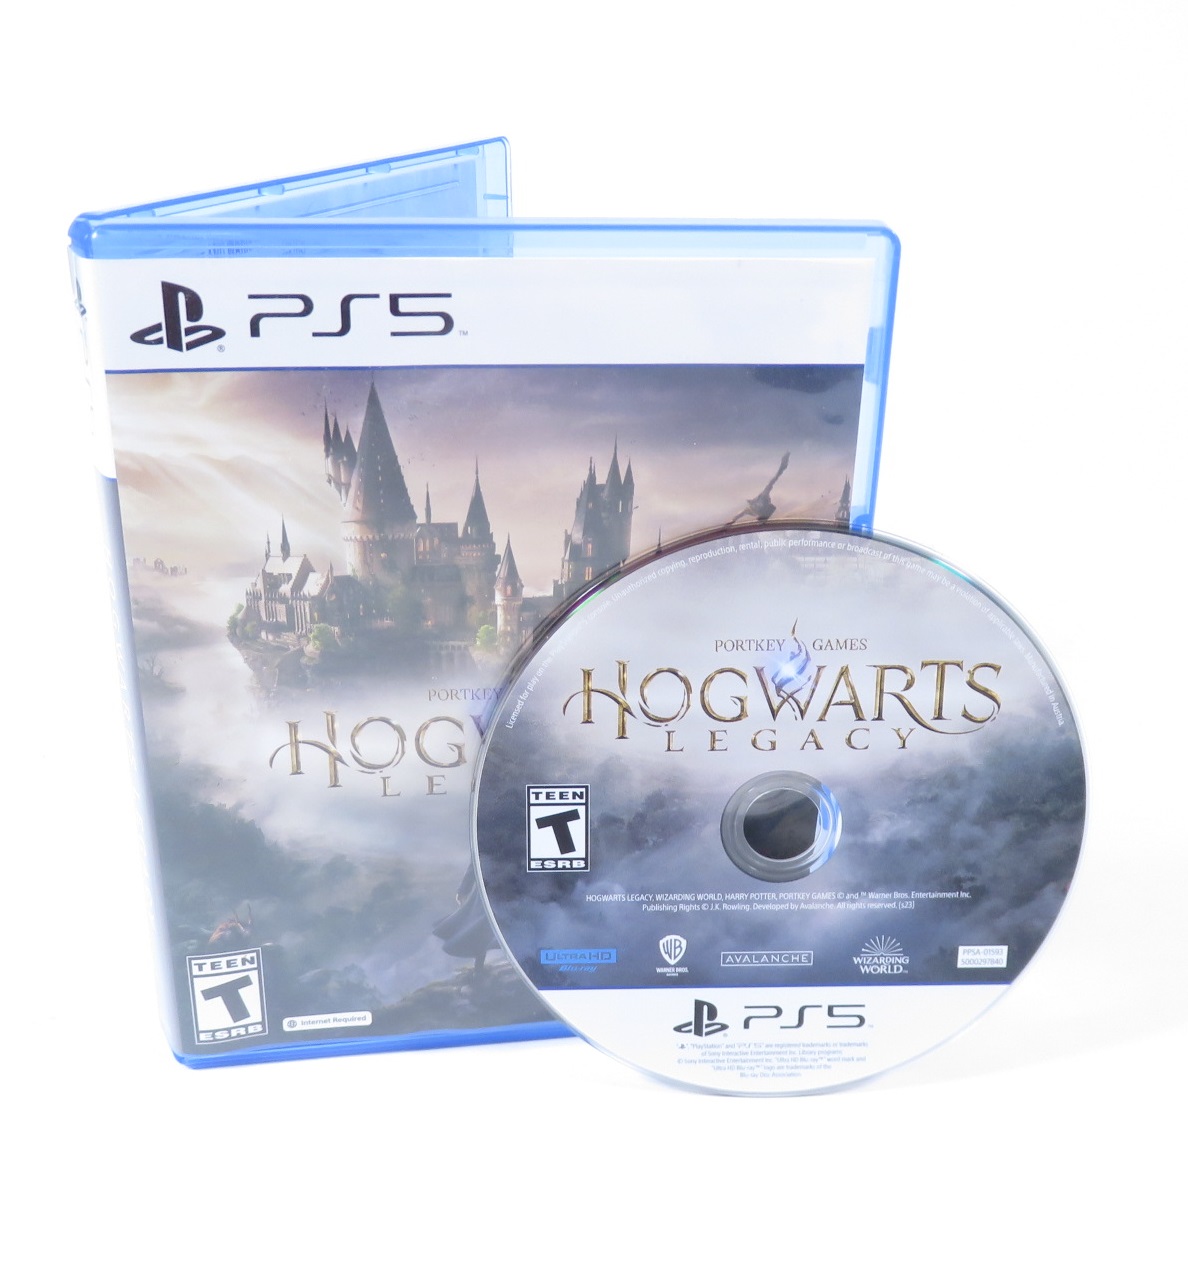 Hogwarts Legacy Video Game for the Sony PlayStation 5